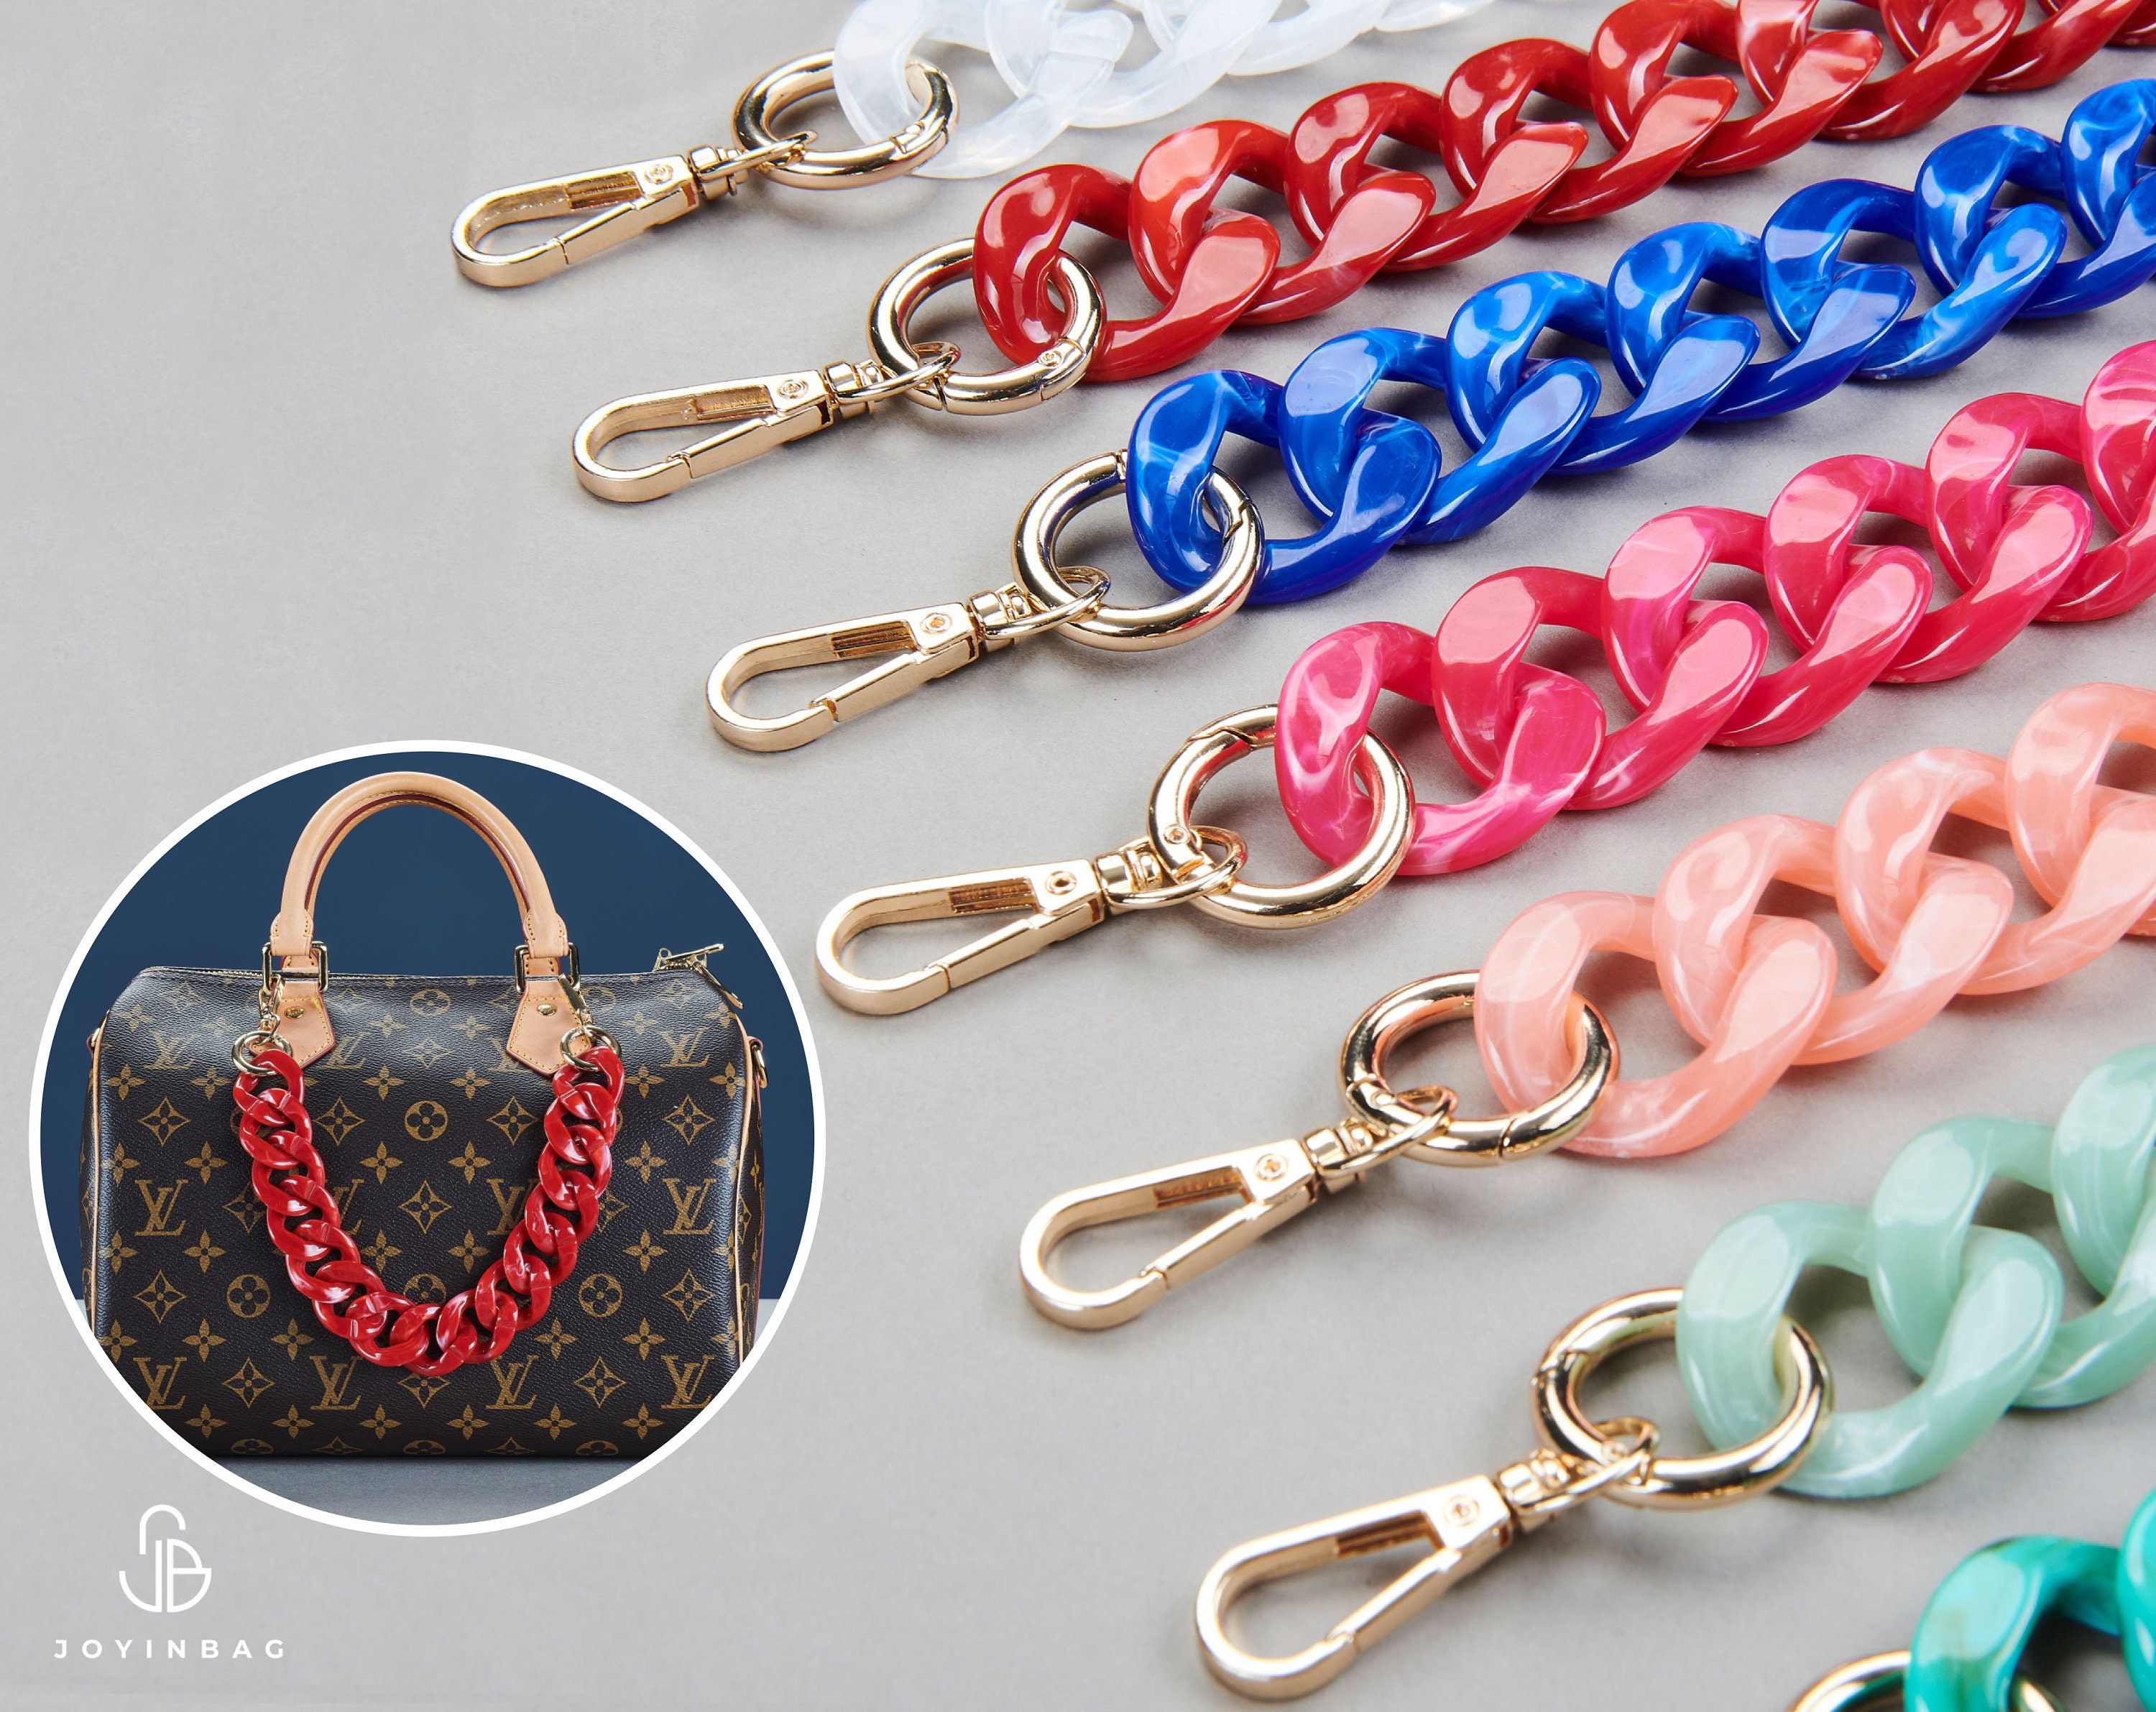 HAPINARY 1pc Bag Chain Accessories Womens Wallet Chain Strap for Purse  Crossbody Bag Accessories Acralloy Ylic Bag Chain Trendy Purses Punk Belt  Chic